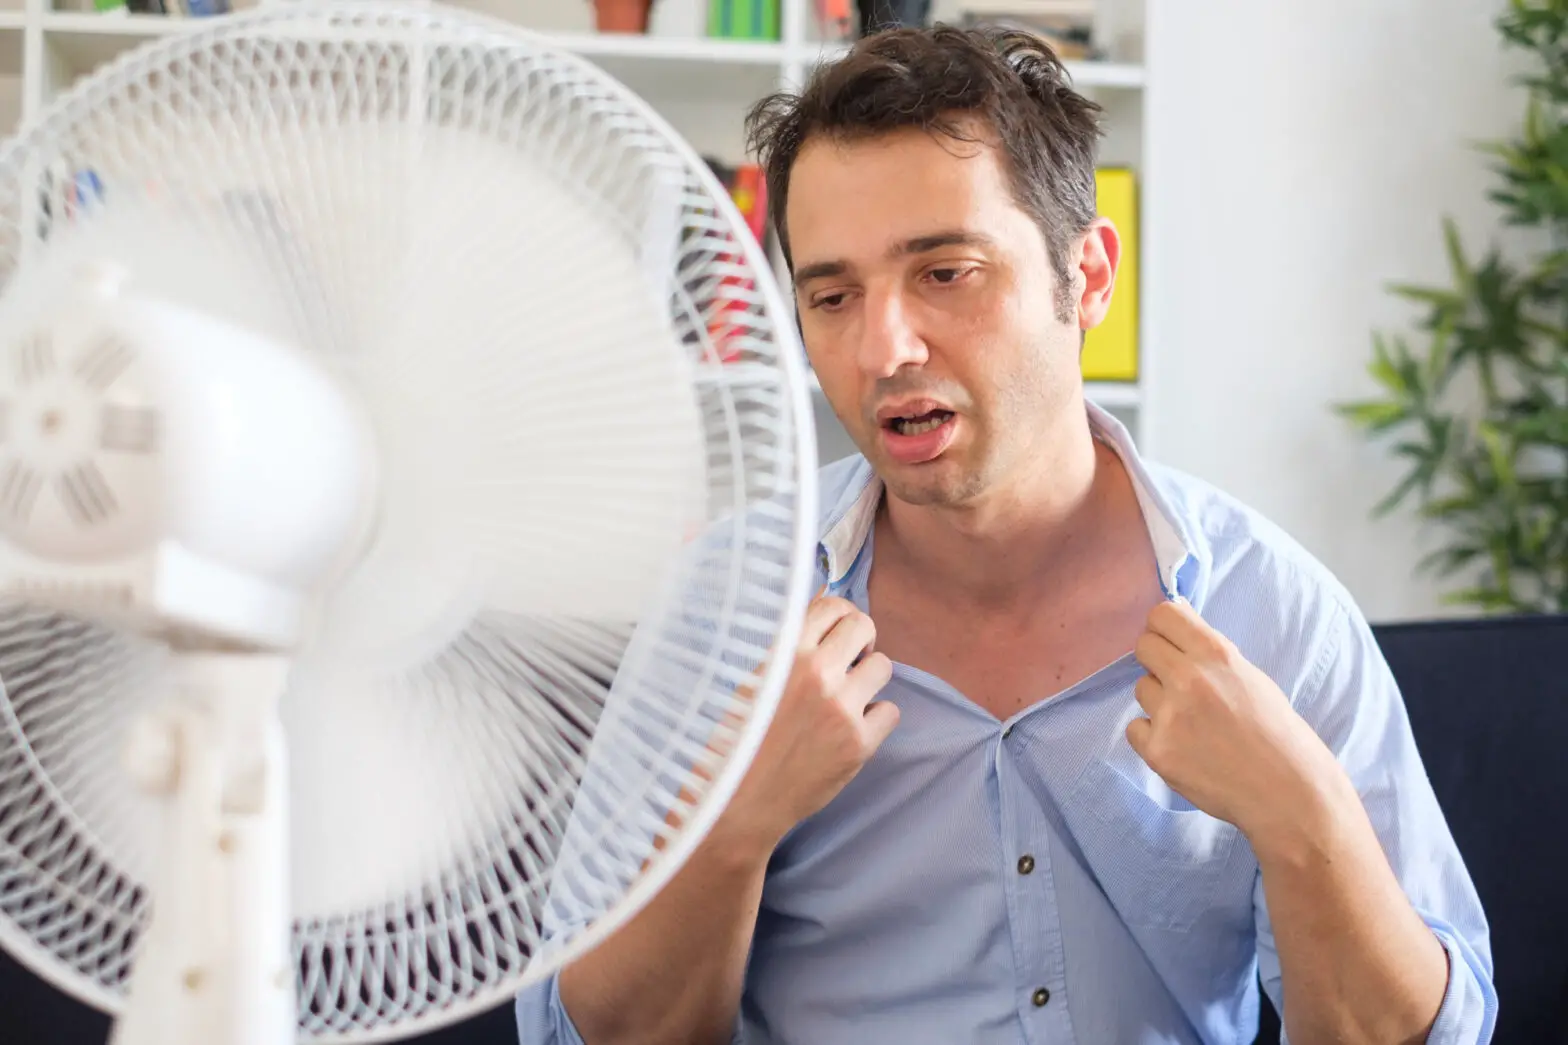 My Apartment Is Too Hot in the Summer: What to Do About the Heat